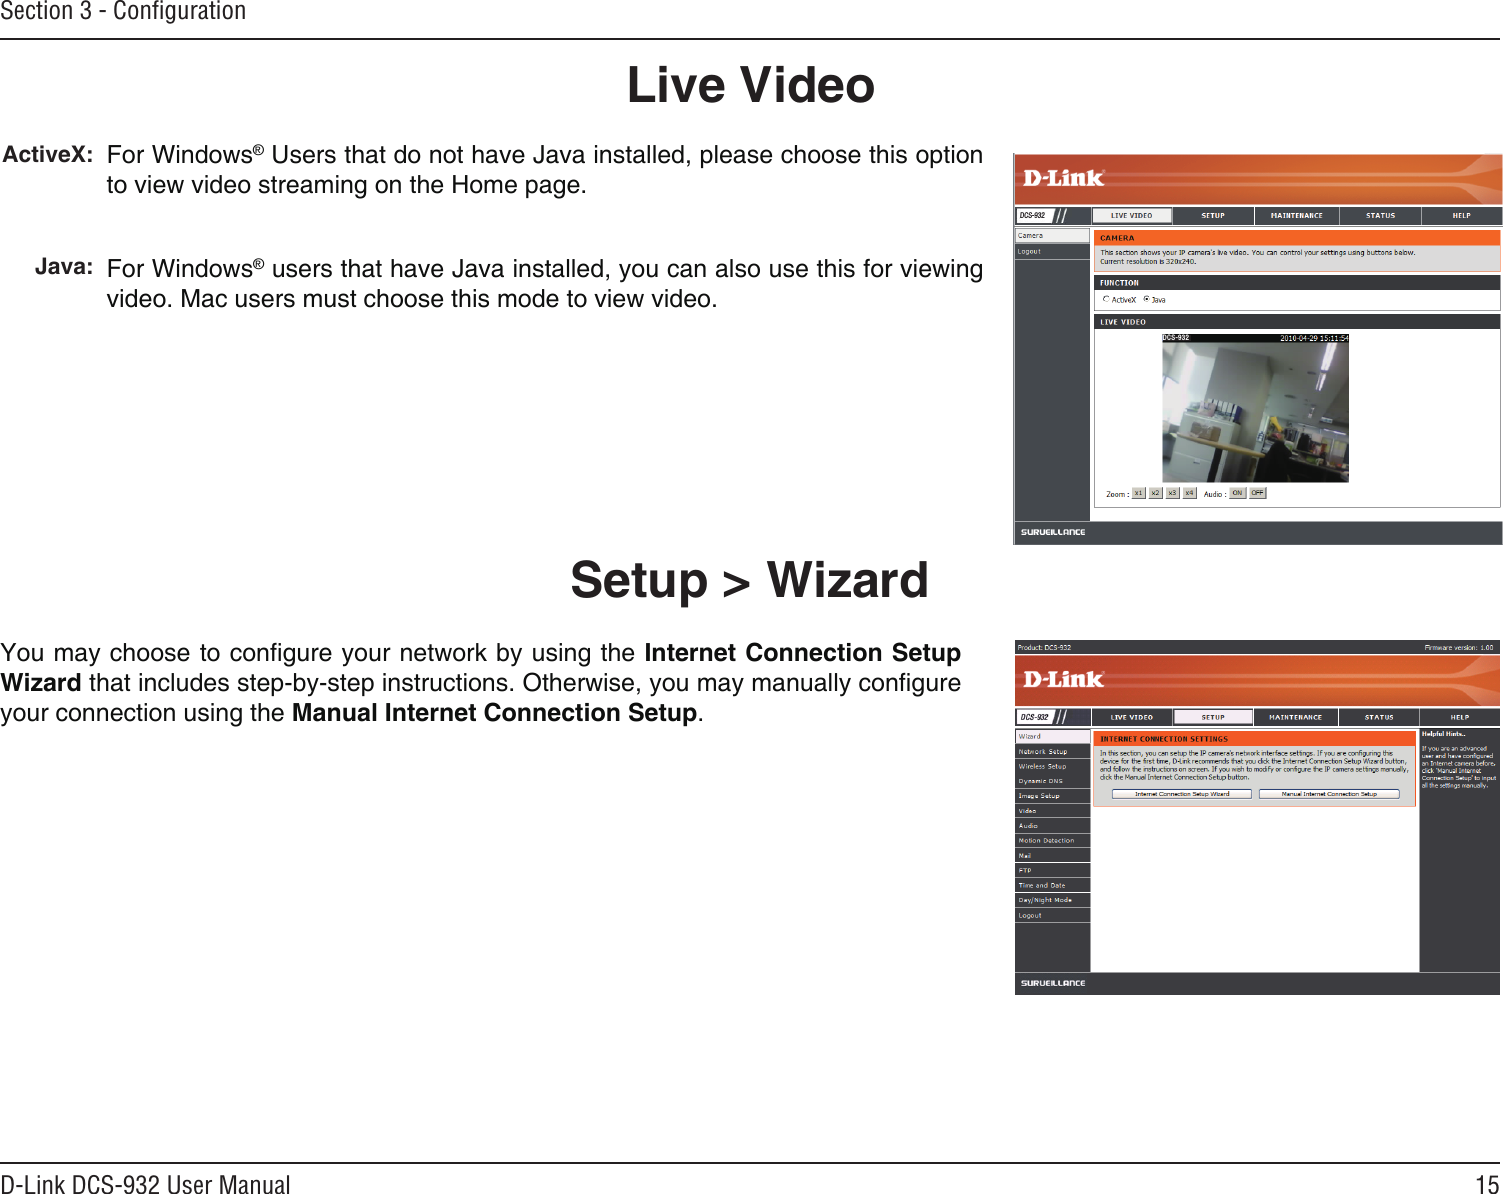 15D-Link DCS-932 User ManualSection 3 - ConﬁgurationLive VideoActiveX:  Java:For Windows® Users that do not have Java installed, please choose this option to view video streaming on the Home page.For Windows® users that have Java installed, you can also use this for viewing video. Mac users must choose this mode to view video. Setup &gt; WizardYou may choose to congure your network by using the Internet Connection Setup Wizard that includes step-by-step instructions. Otherwise, you may manually congure your connection using the Manual Internet Connection Setup.DCS-932DCS-932